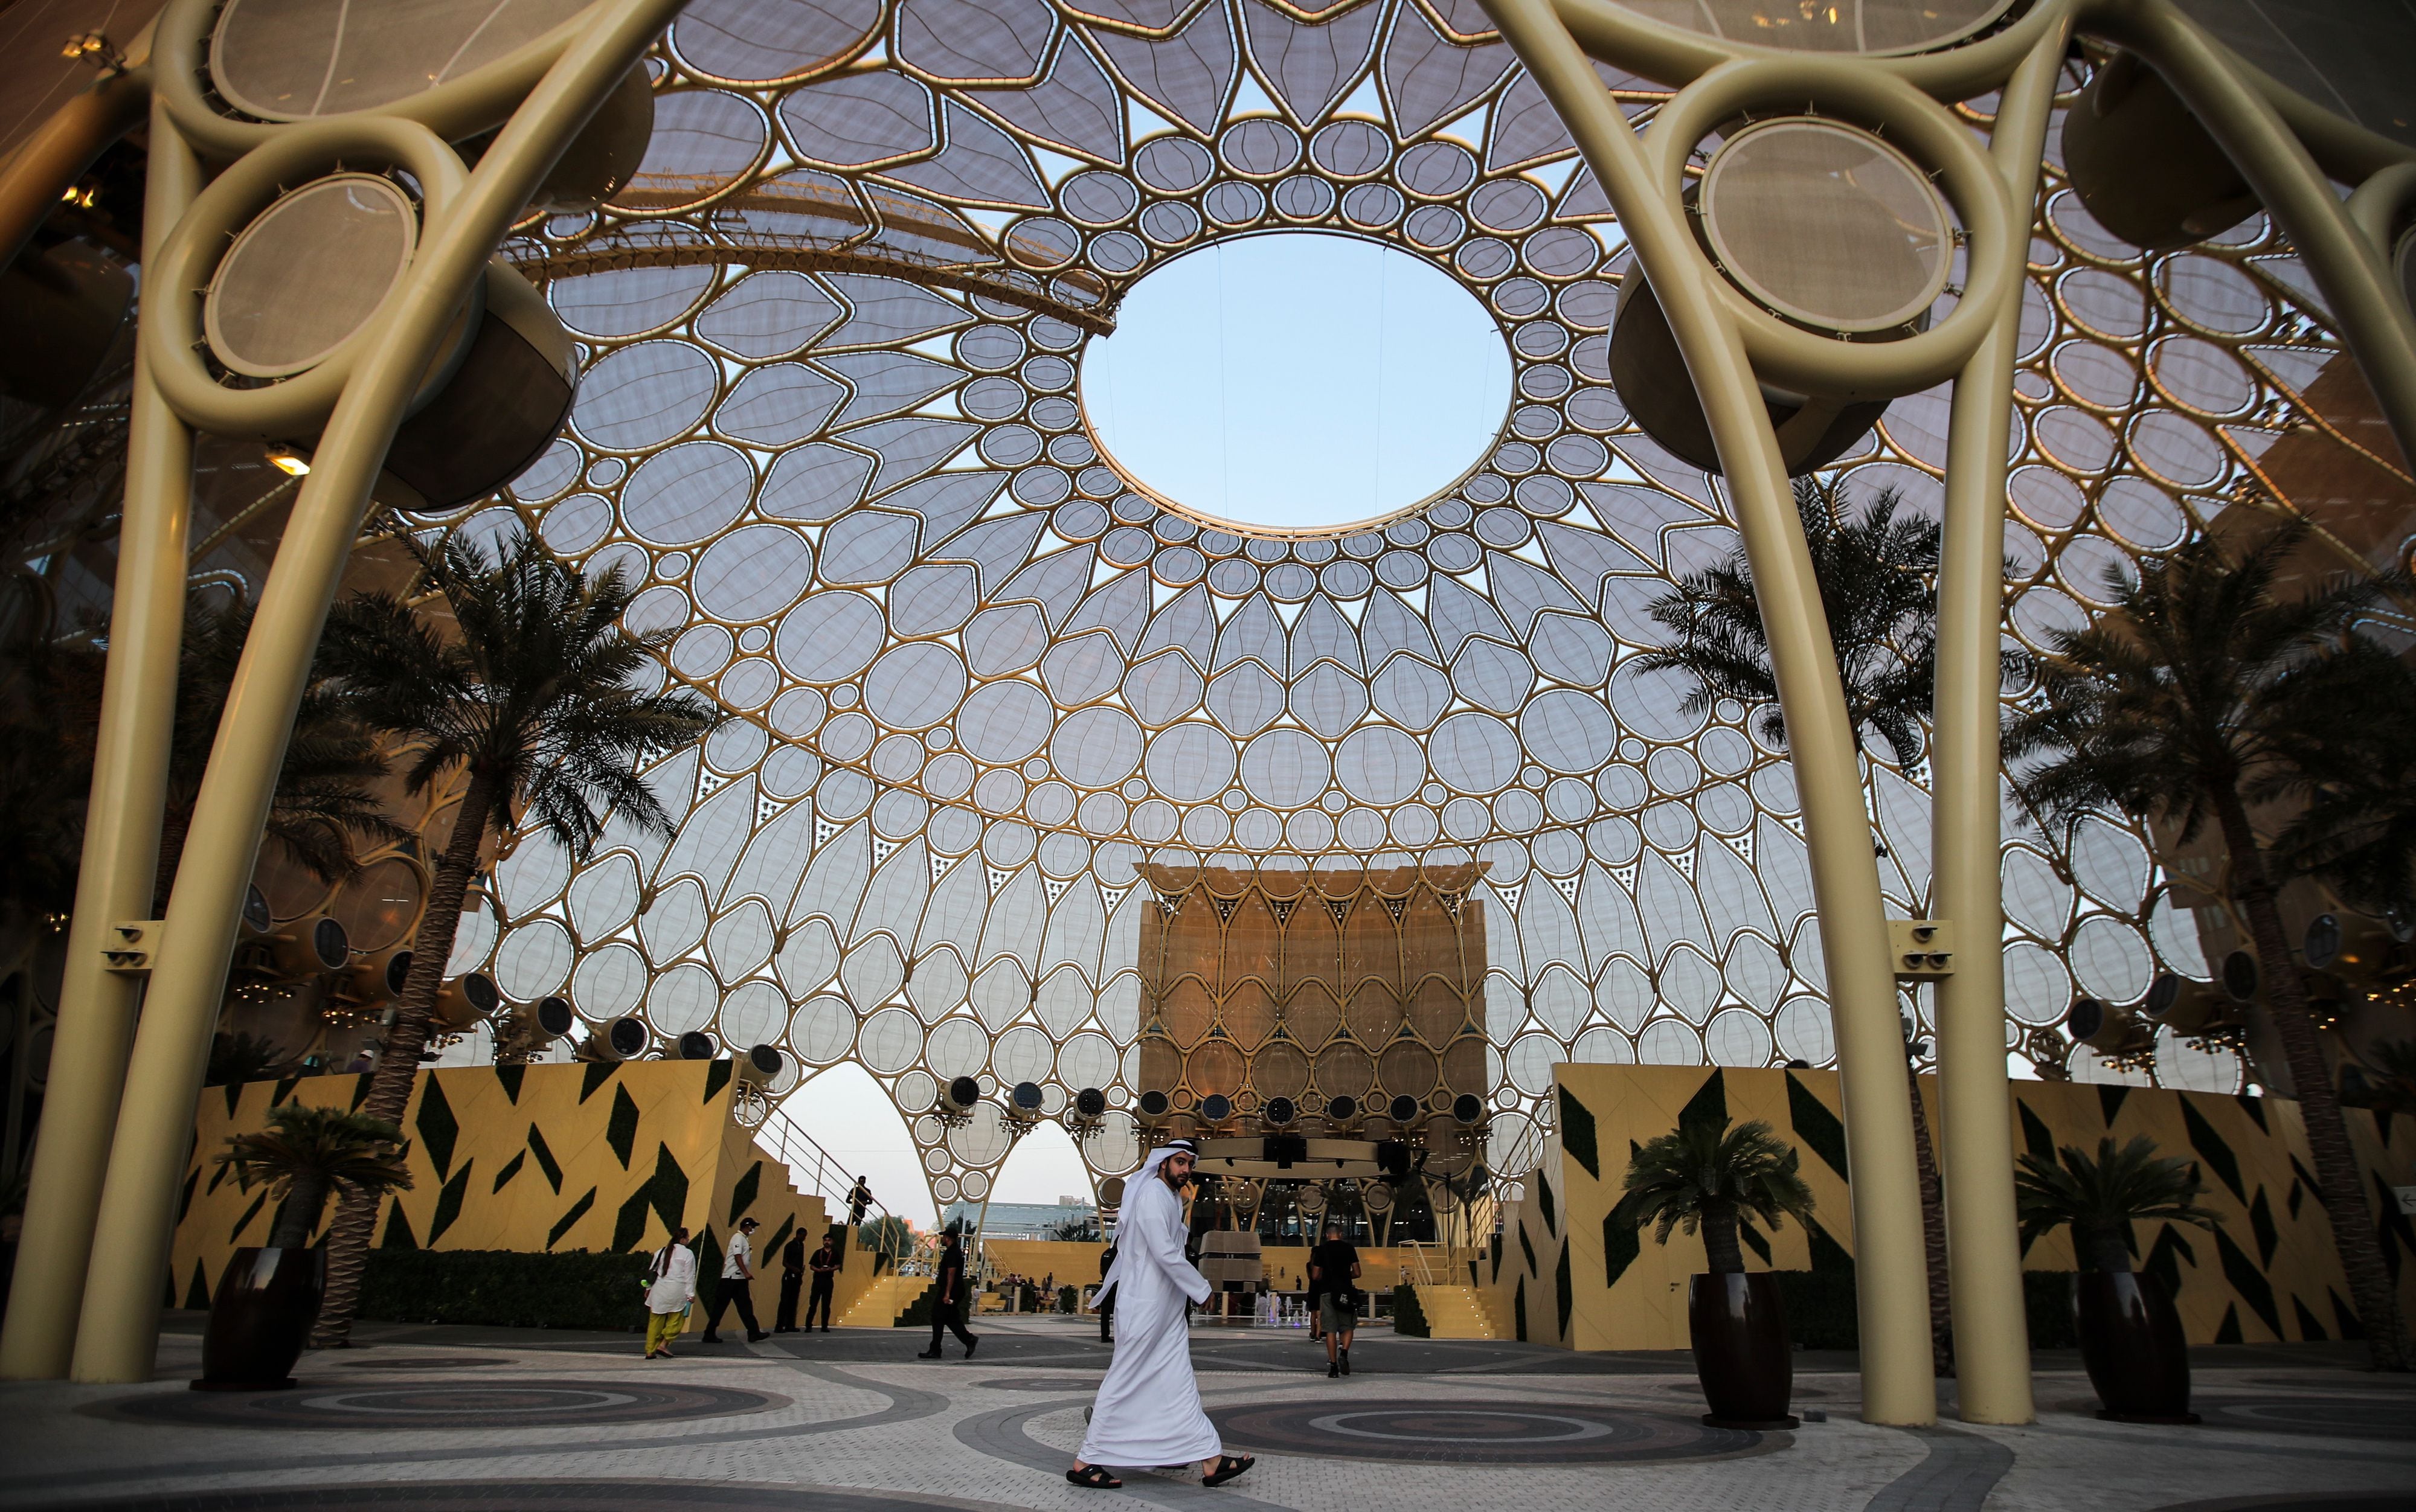 Expo 2020 Dubai expected to add $42bn to UAE economy until 2042, EY says